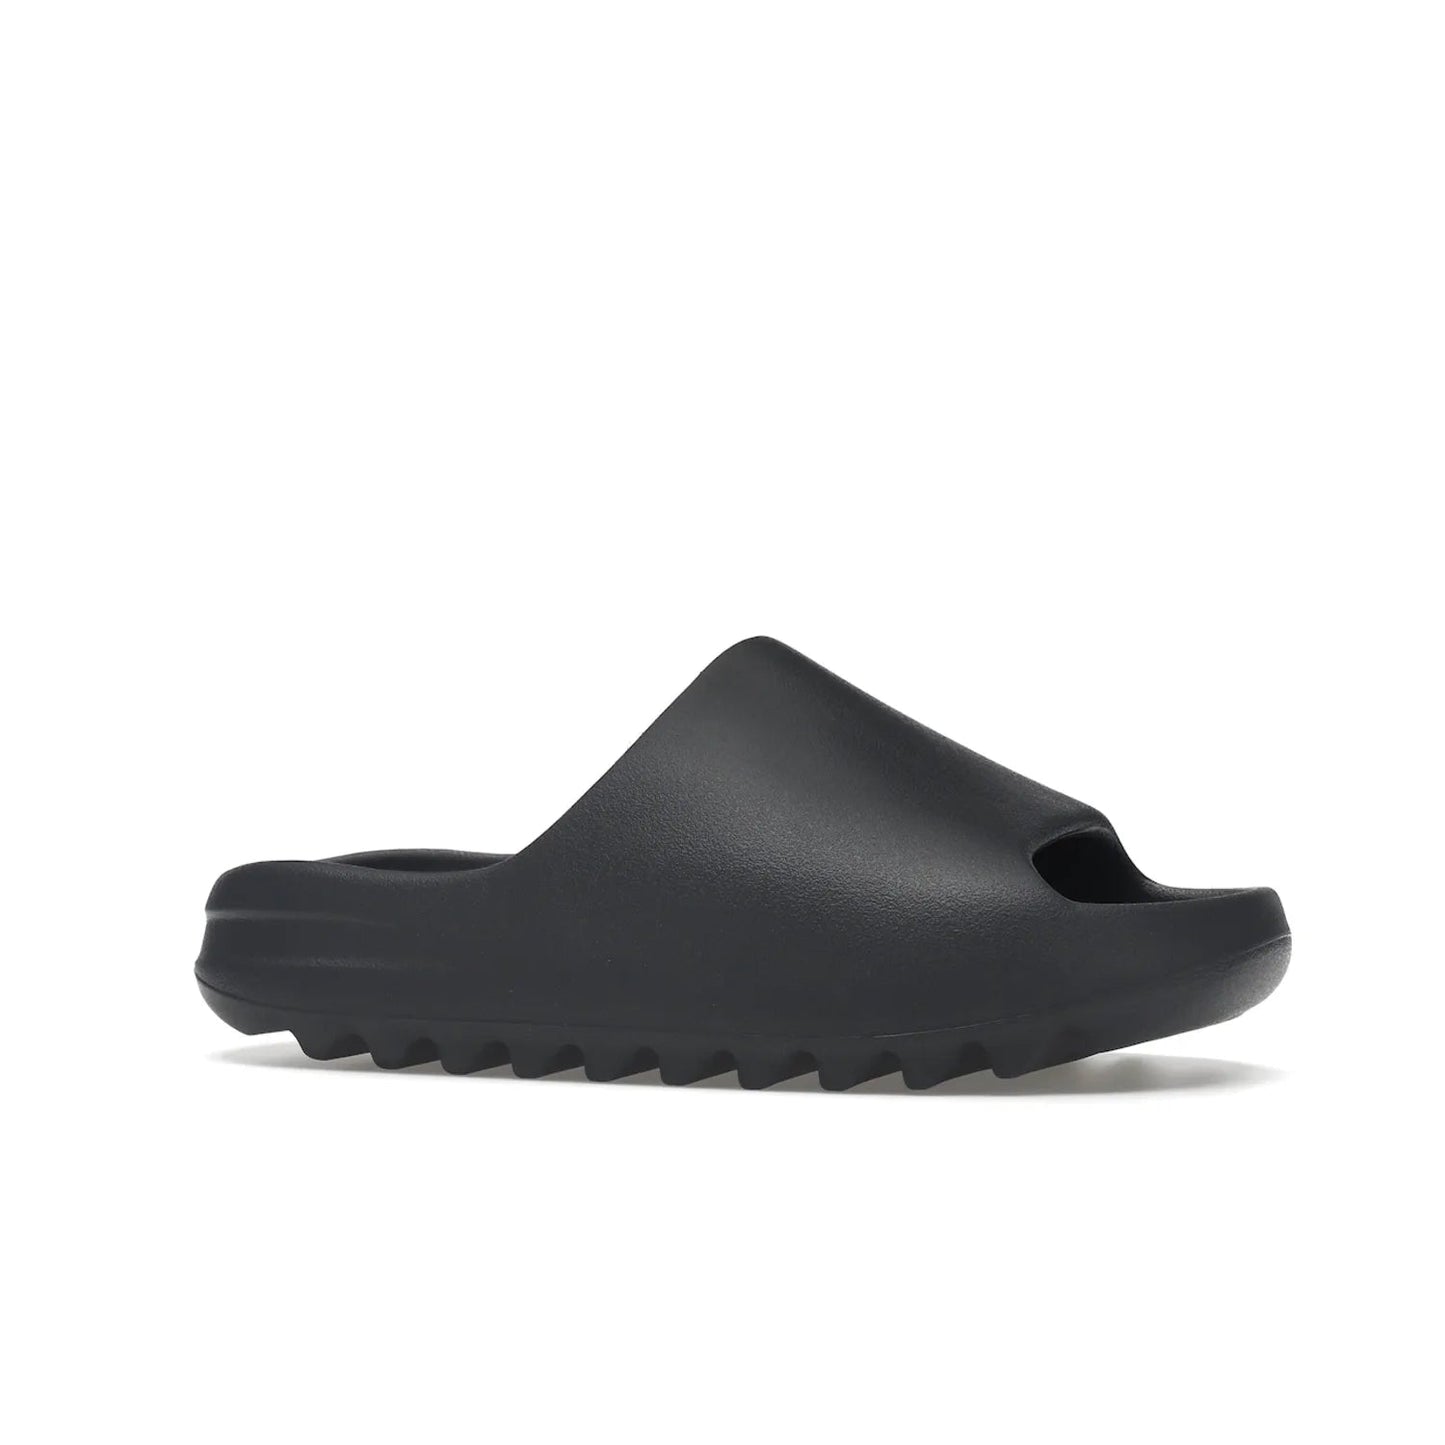 adidas Yeezy Slide Slate Grey - Image 3 - Only at www.BallersClubKickz.com - Stylish & comfortable adidas Yeezy Slide Slate Grey features an EVA foam upper, strategic cutouts, textured outsole pattern, & easy slip-on design for modern comfort & classic style.